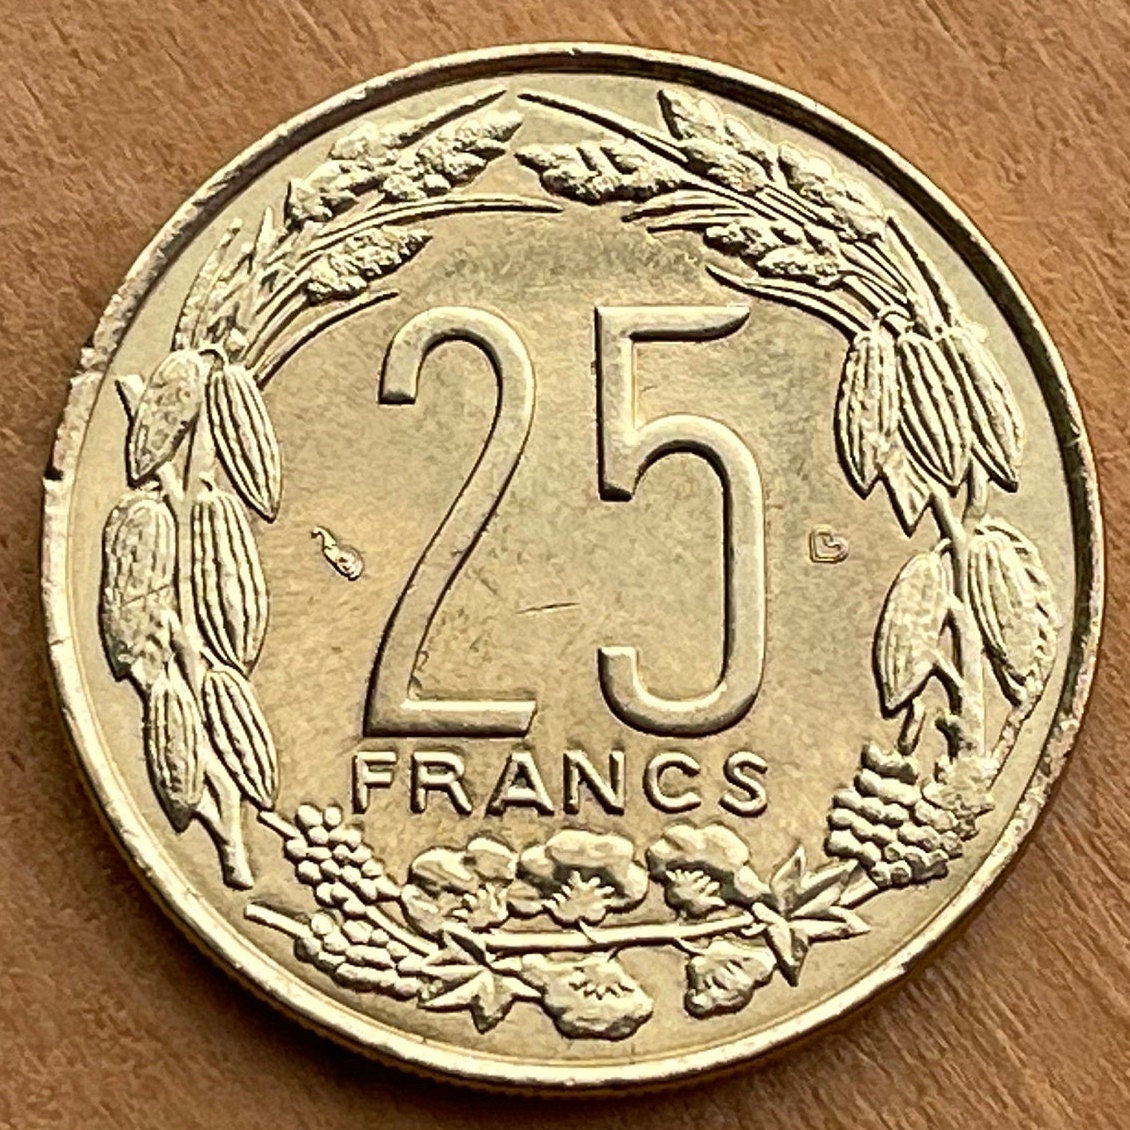 Giant Elands 25 Francs Central African States Authentic Coin Money for Jewelry and Craft Making (Lord Derby Eland) 2003